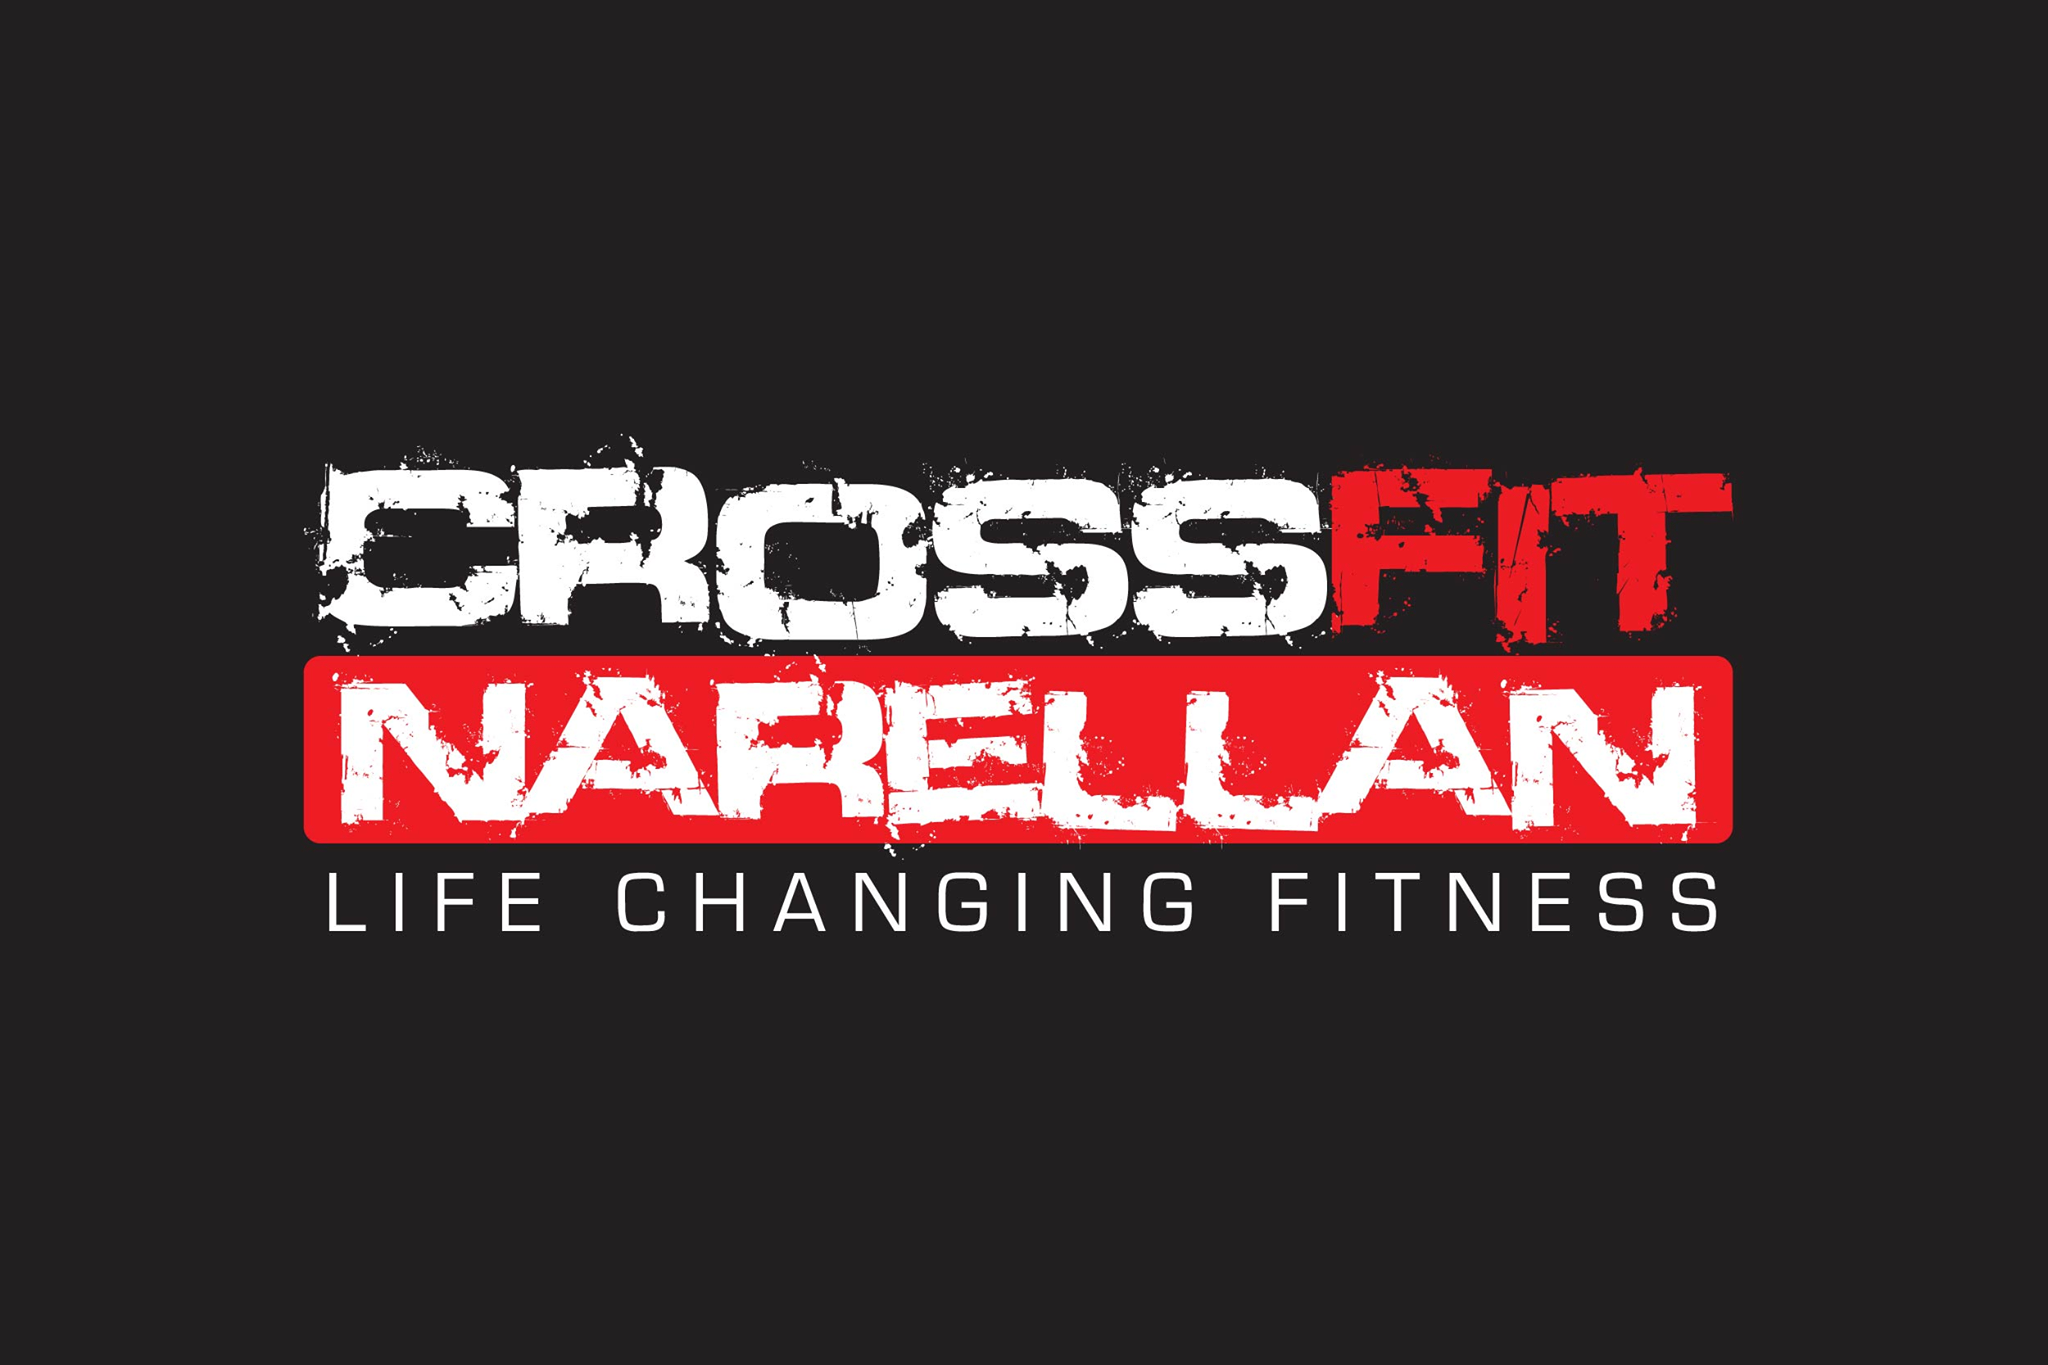 CrossFit coach and Personal Trainer